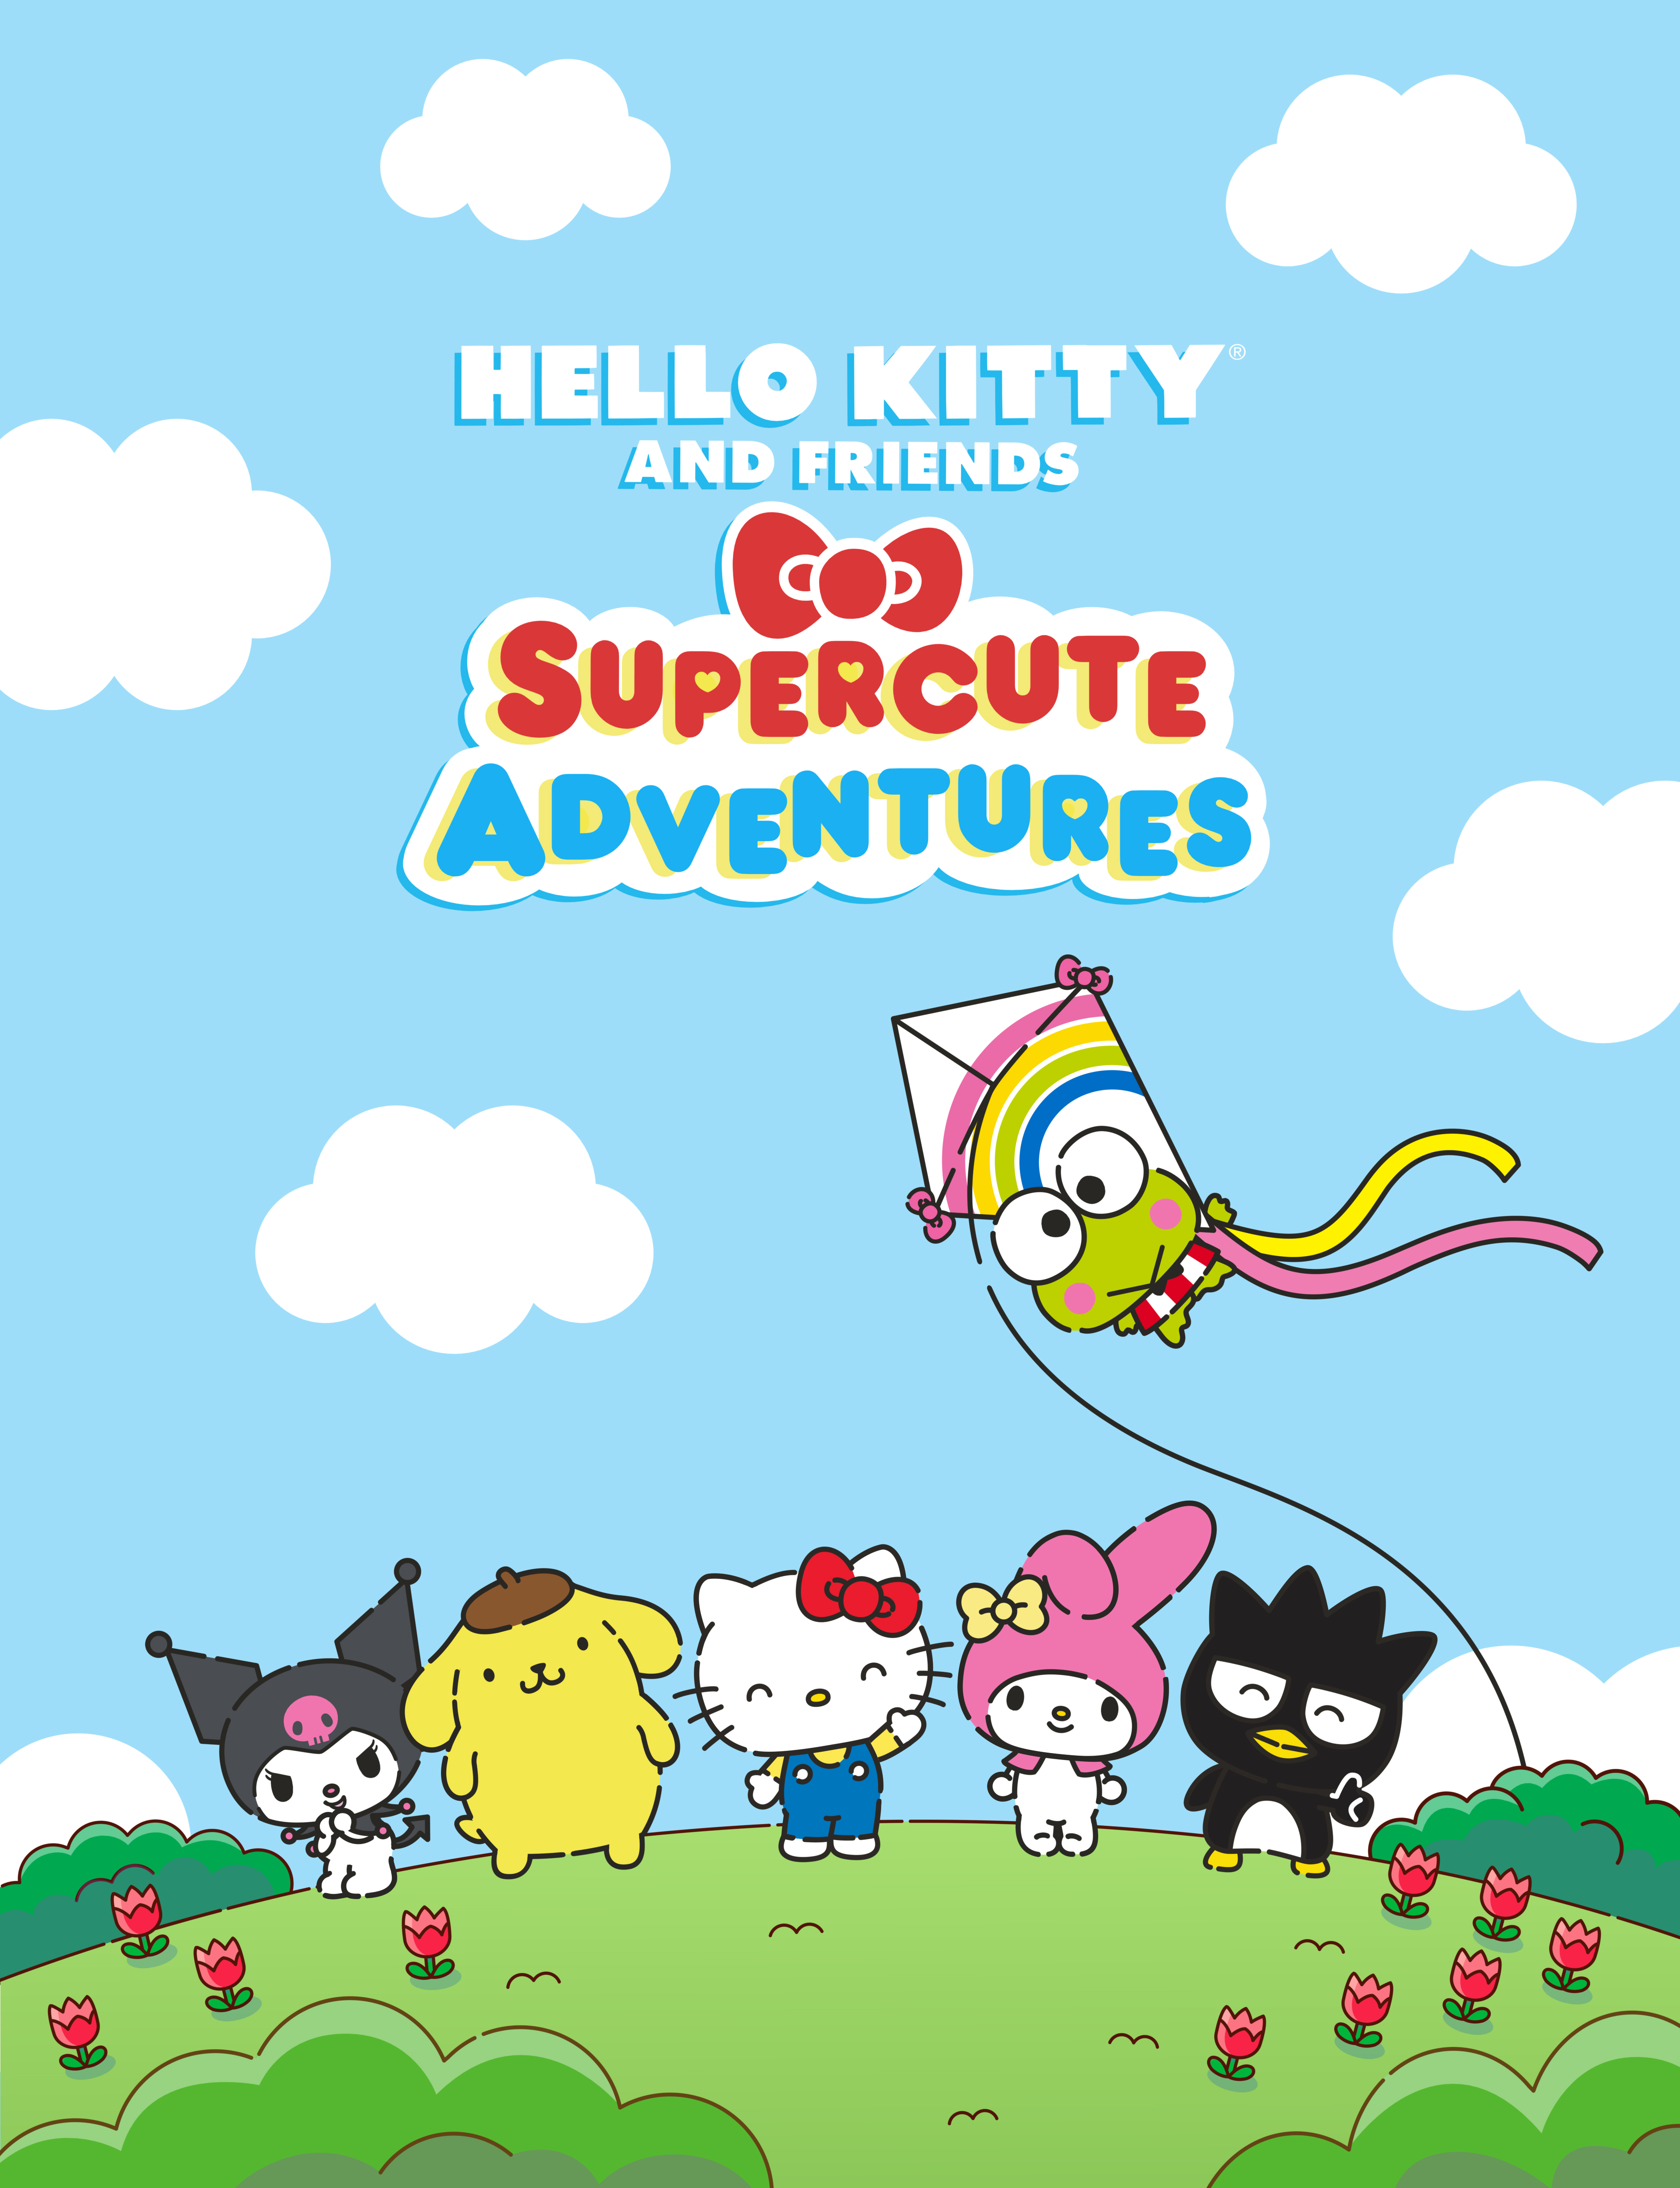 Sanrio® Debuts Hello Kitty® and Friends Supercute Adventures Animated Series  on YouTube in Celebration of Company's 60th Anniversary | Business Wire